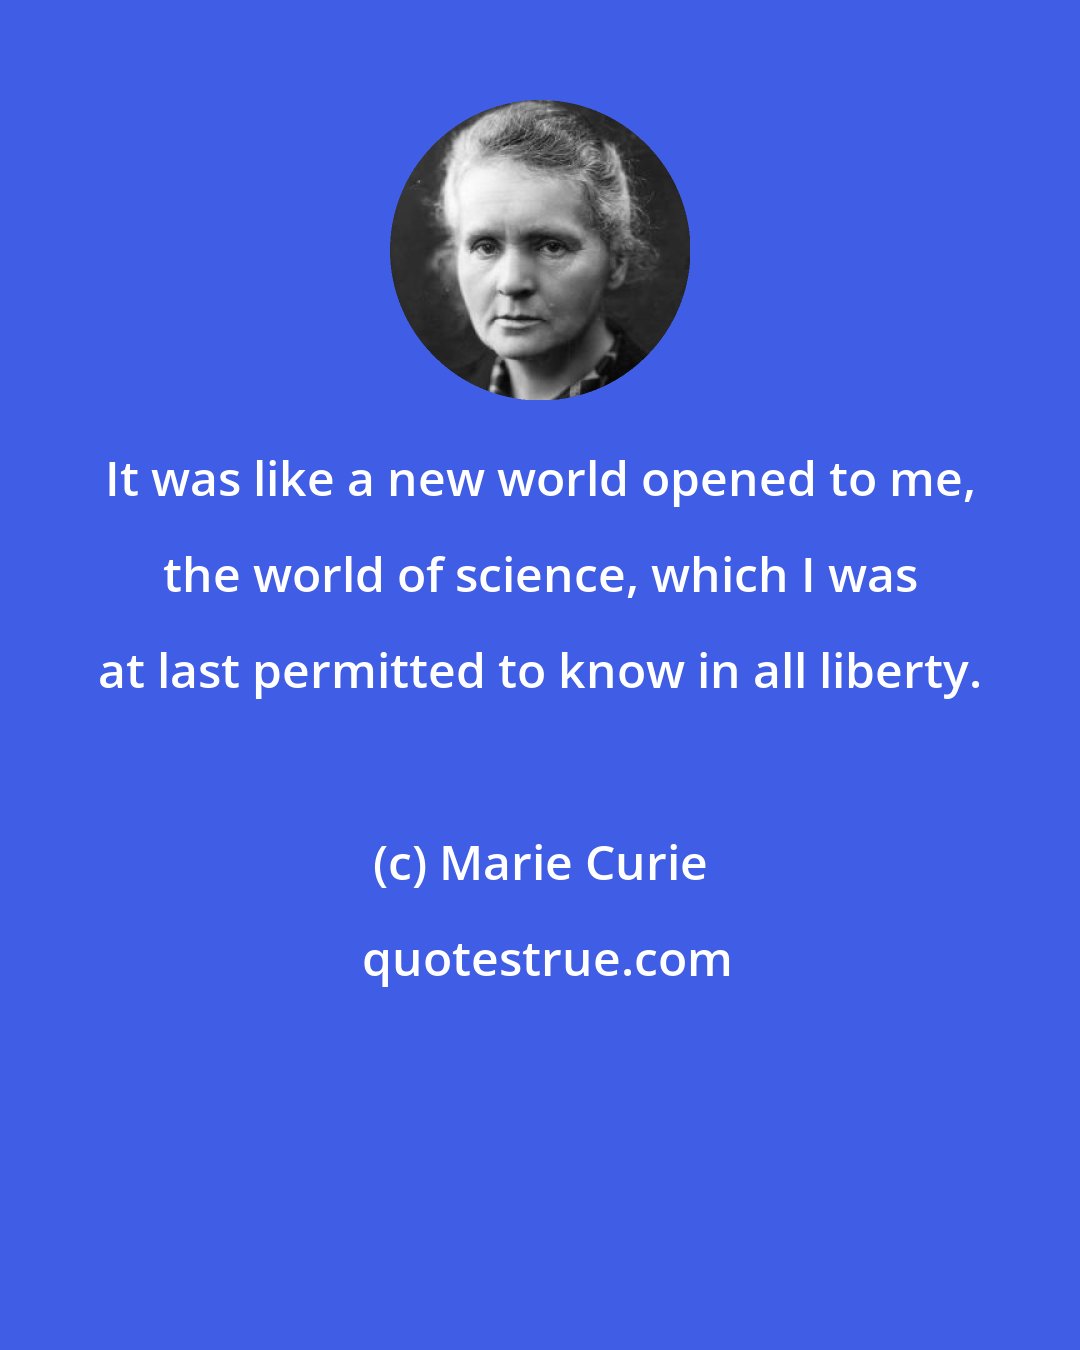 Marie Curie: It was like a new world opened to me, the world of science, which I was at last permitted to know in all liberty.